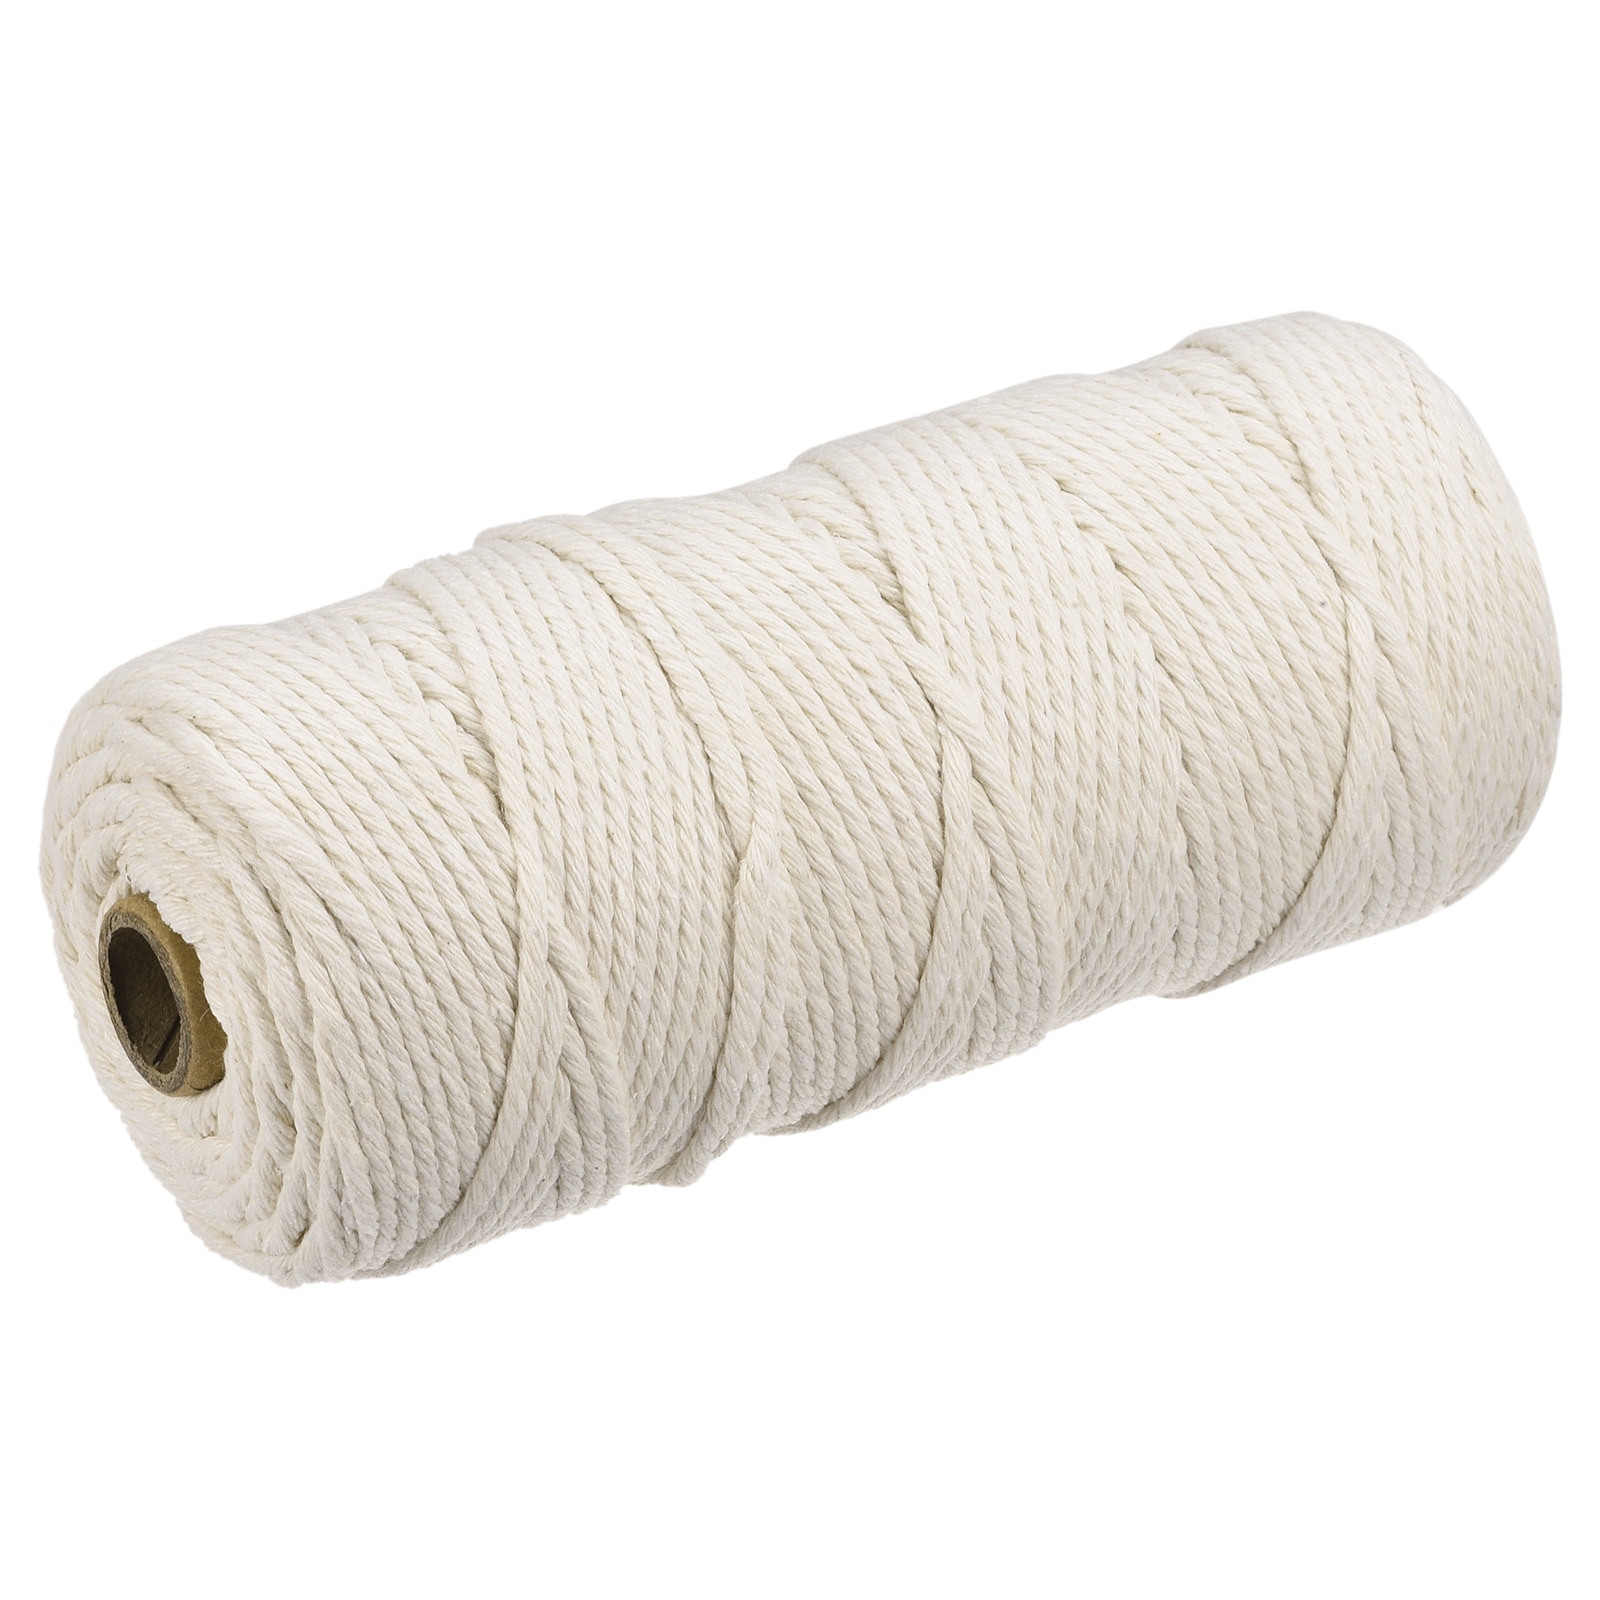 Macrame Cord,3mm x 328 Feet Cotton Twine String Cord,Natural White Cotton Rope Craft String for DIY Knitting Plant Hangers Christmas Wedding Décor (Be